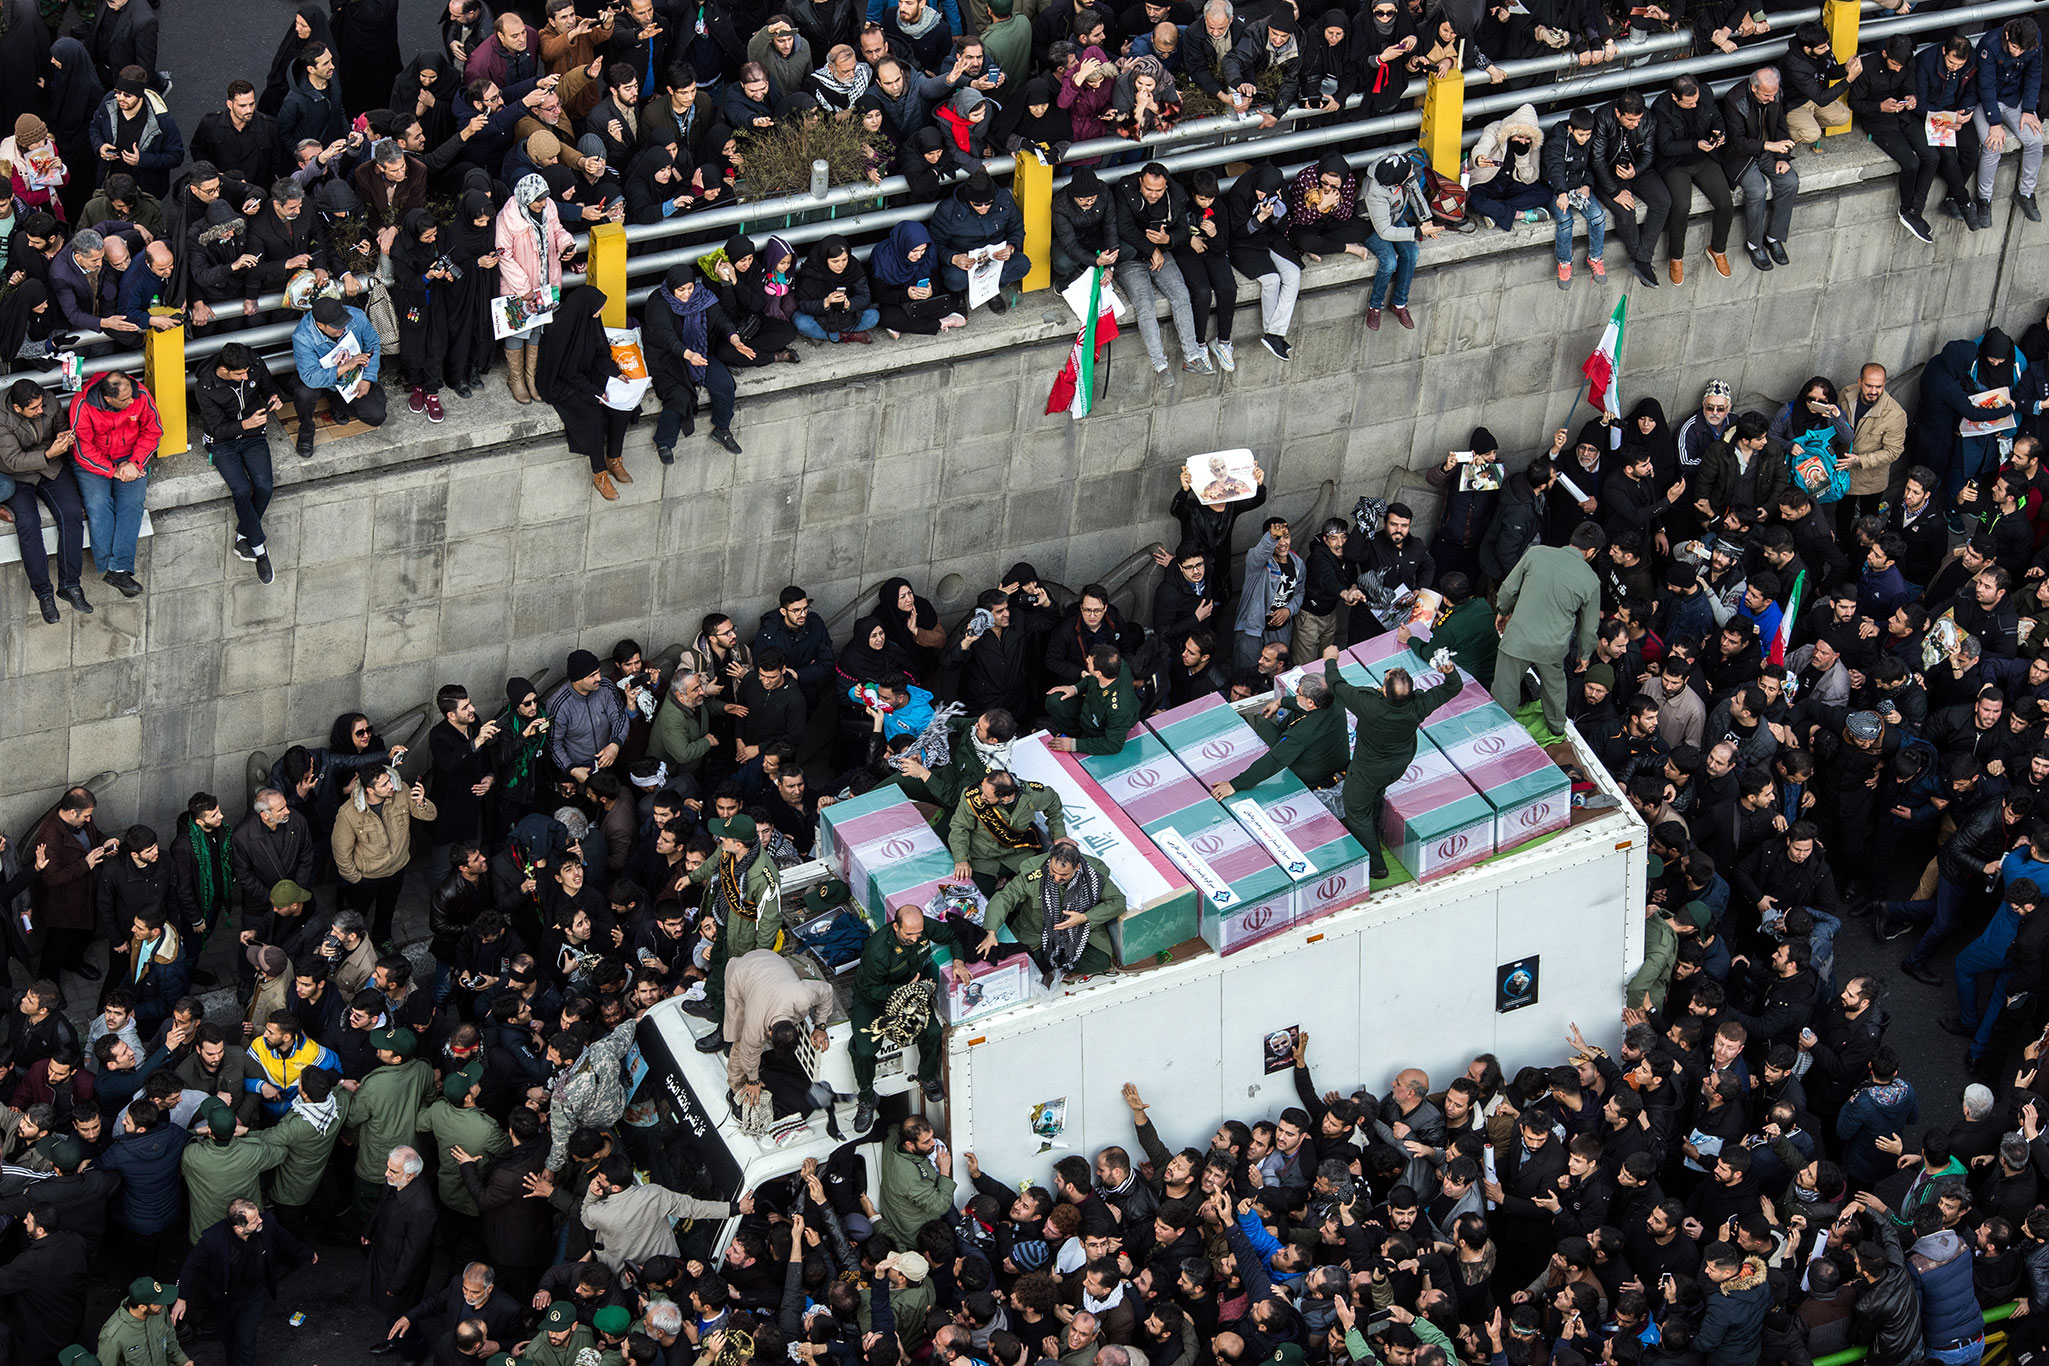 The coffins of Maj. Gen. Qassem Soleimani and others are carried on a truck through Tehran during a funeral procession on Monday, Jan. 6, 2019. (Arash Khamooshi/The New York Times)